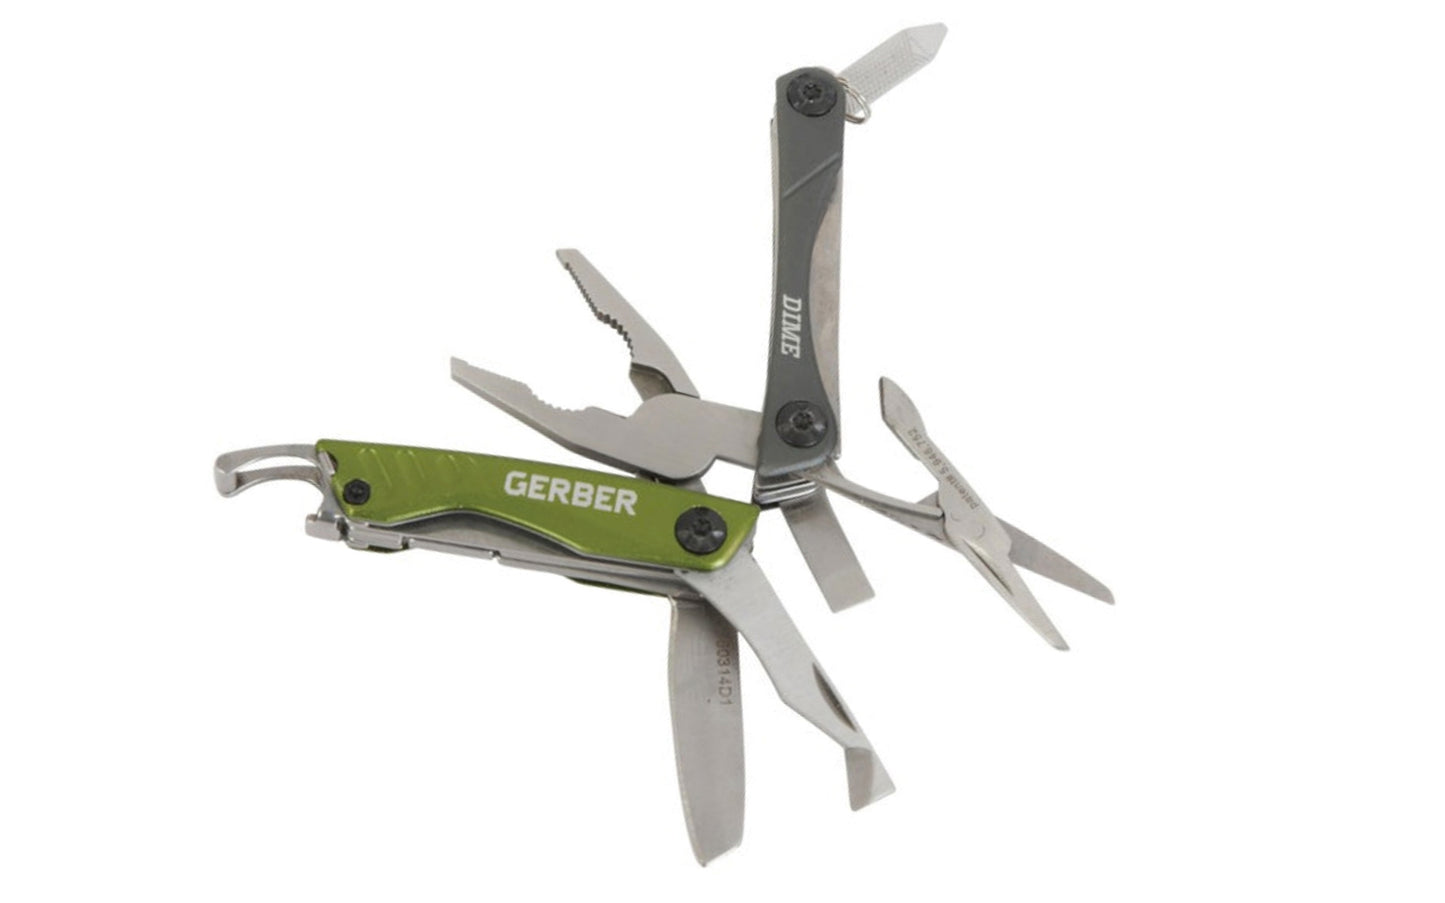 Gerber Dime 12-Tool Multi-Plier. Dime Micro tool features: Needle nose spring-loaded pliers, wire cutter, fine edge blade, retail package opener, scissors, medium flat driver, crosshead driver, bottle opener, tweezers, & file. Compact & lightweight. Overall length: 4-1/4" Closed length: 2-3/4"